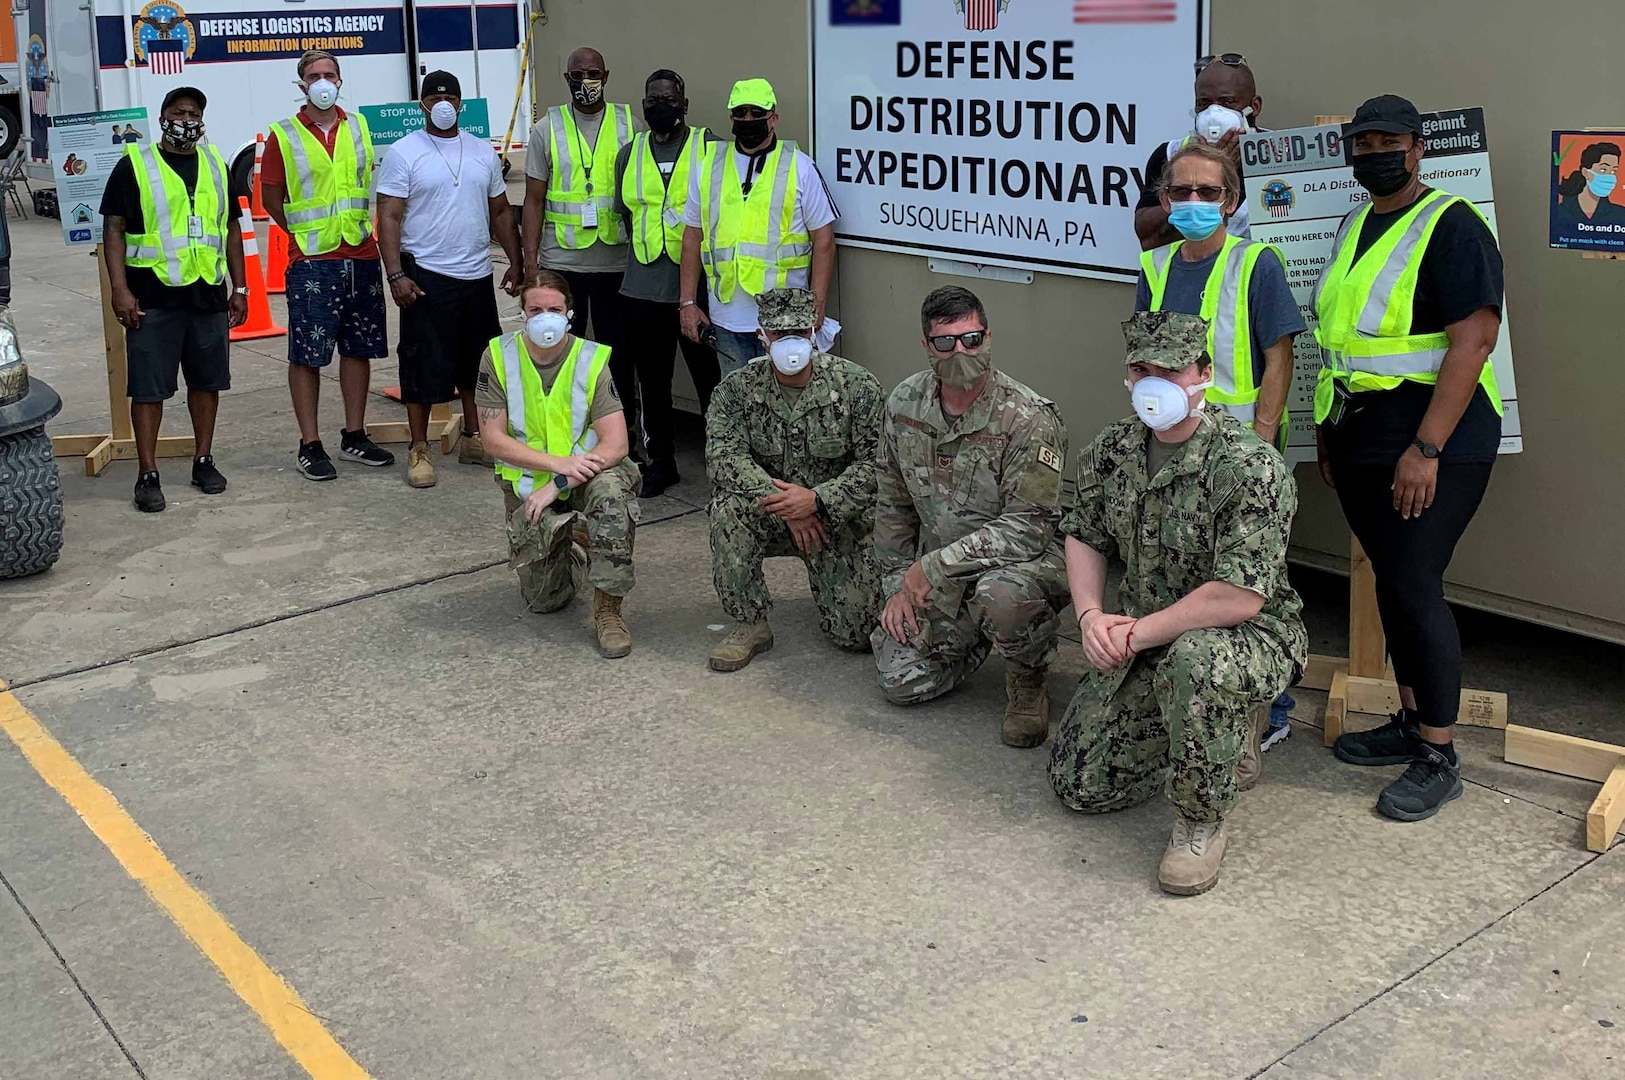 DLA Distribution Expeditionary supports Hurricane Ida recovery efforts